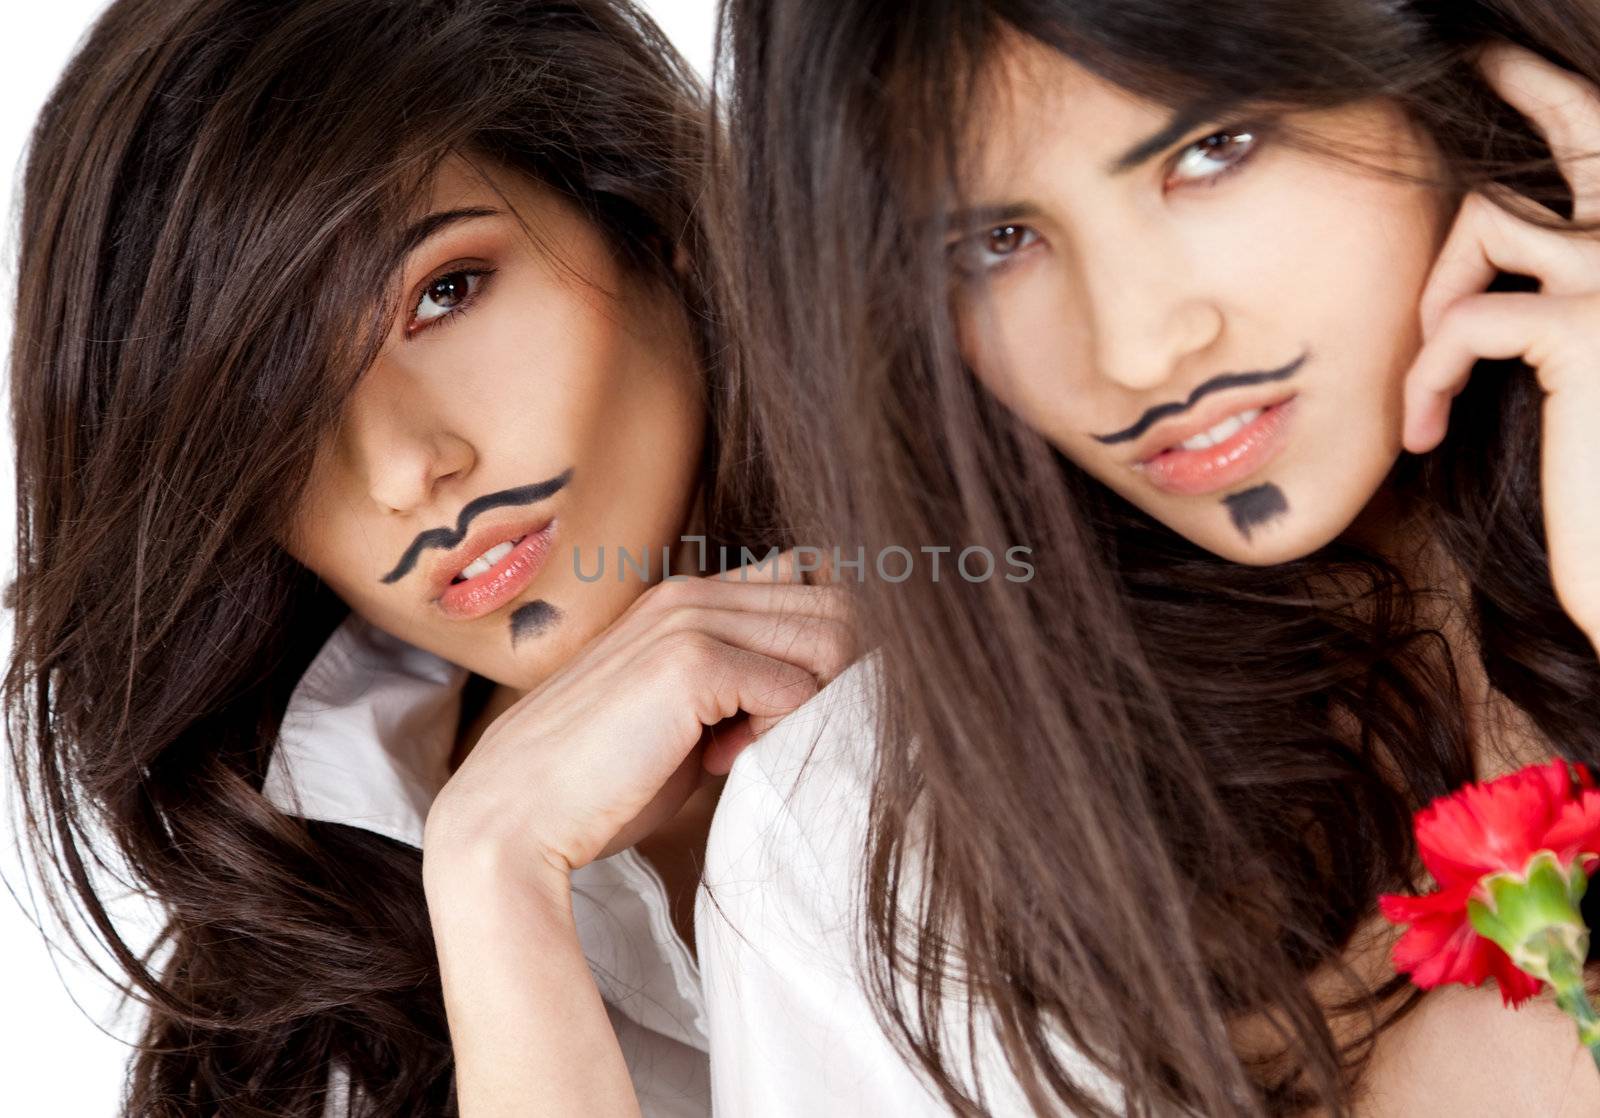 female twins posing with moustache dendy makeup, looking at camera